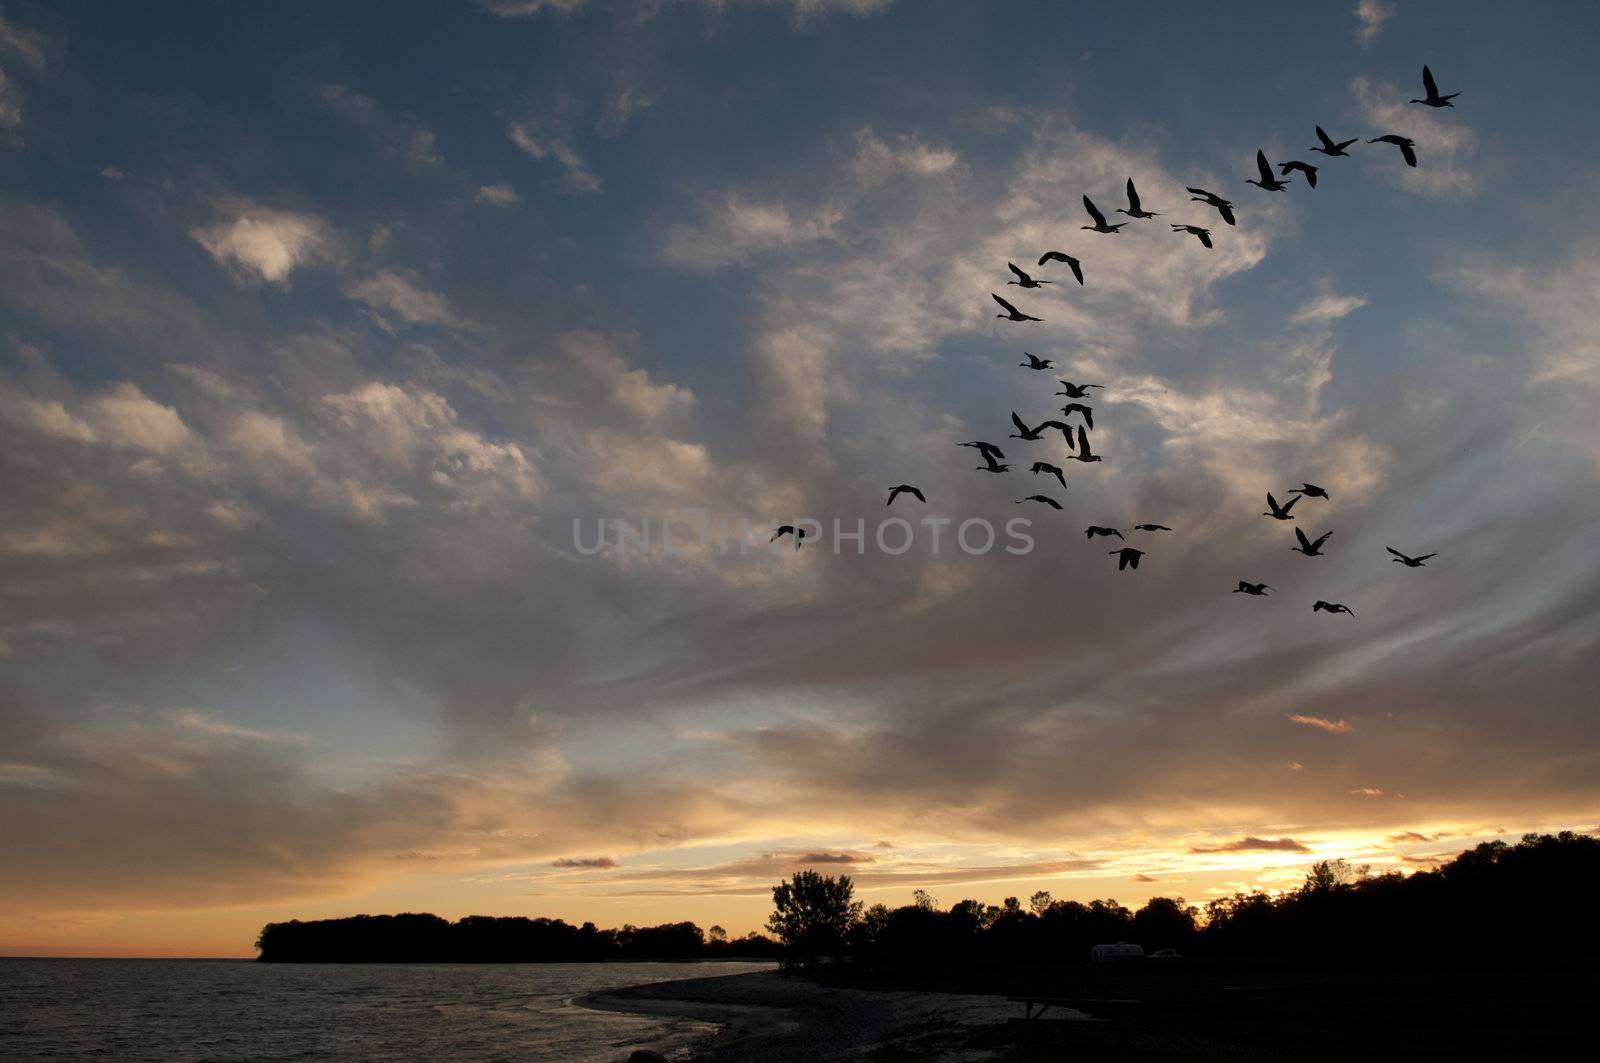 Geese at Sunset by Gordo25